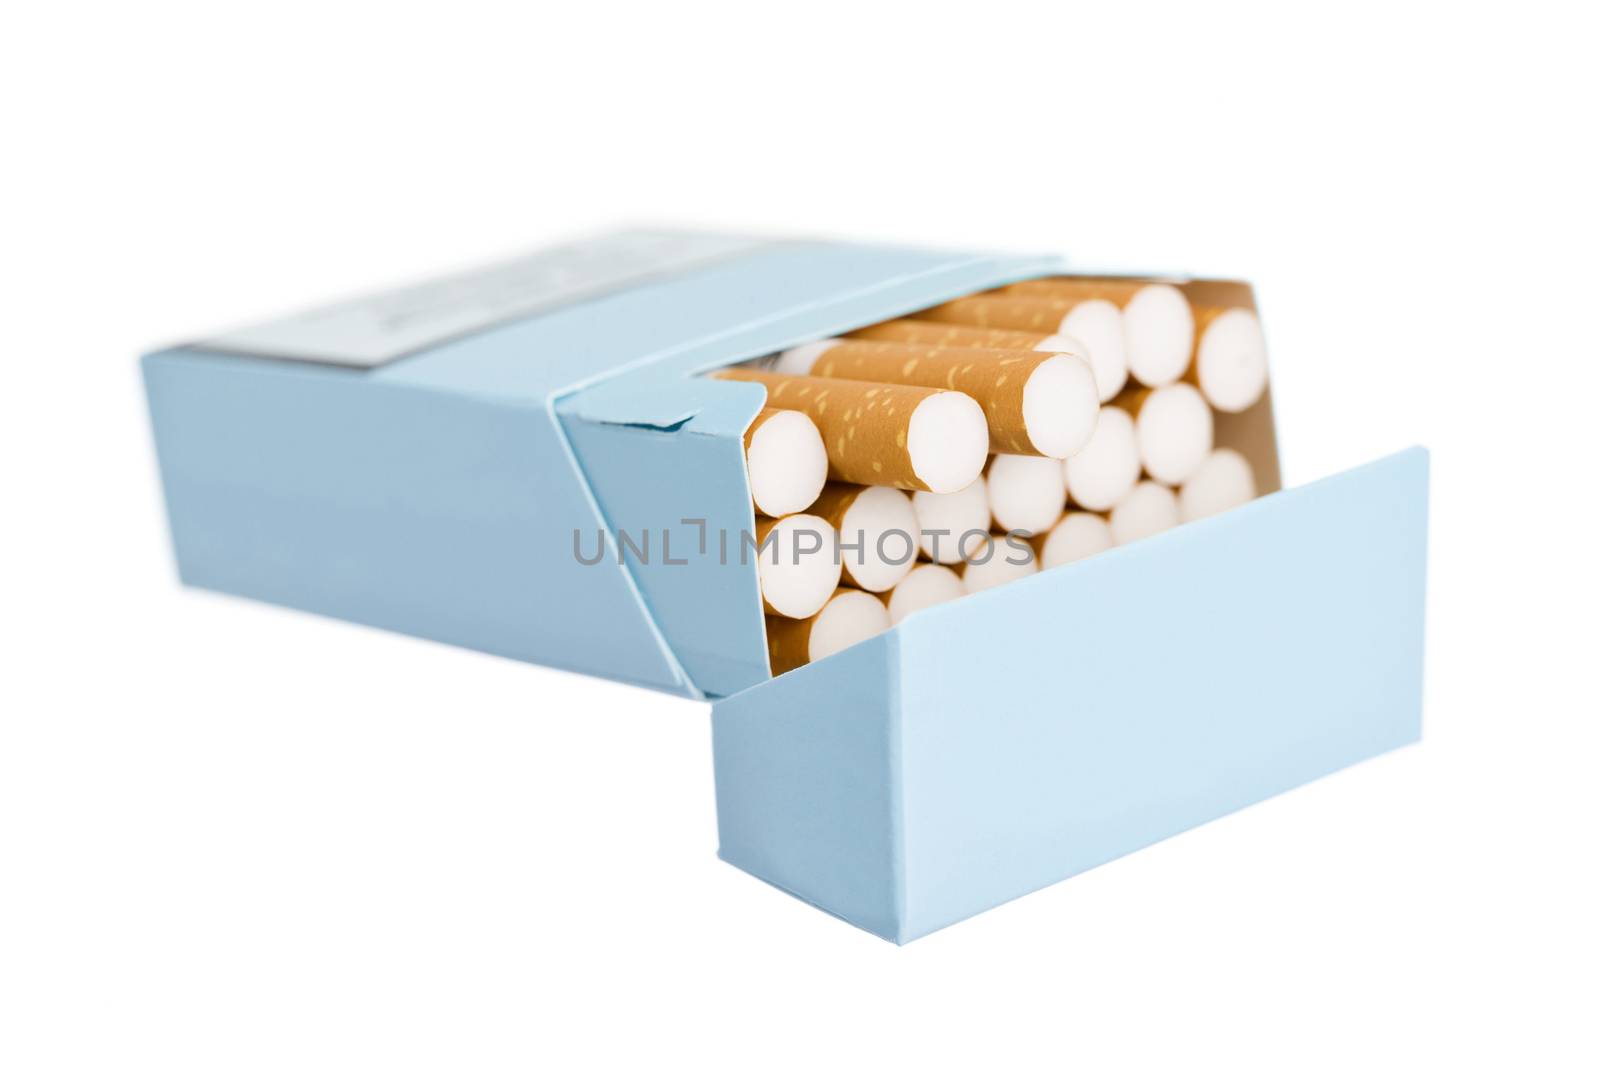 Pack of cigarettes by gemenacom